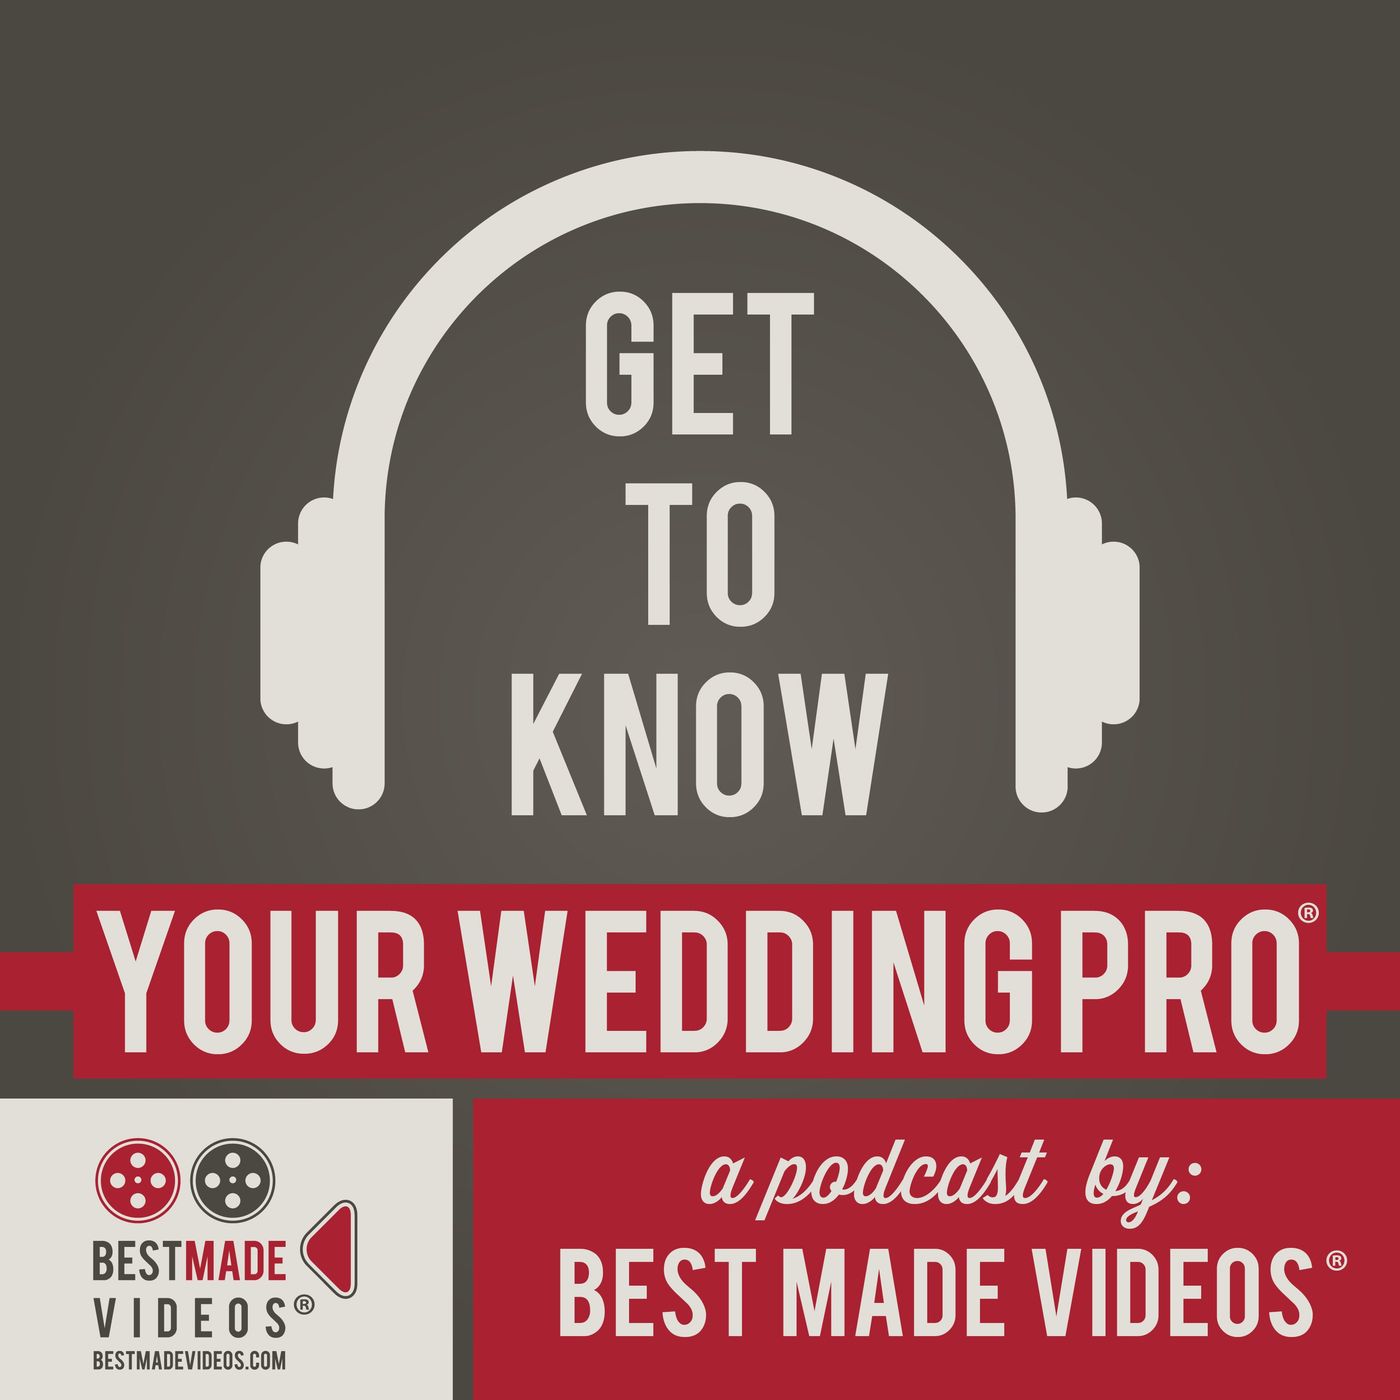 Get to Know Your Wedding Pro